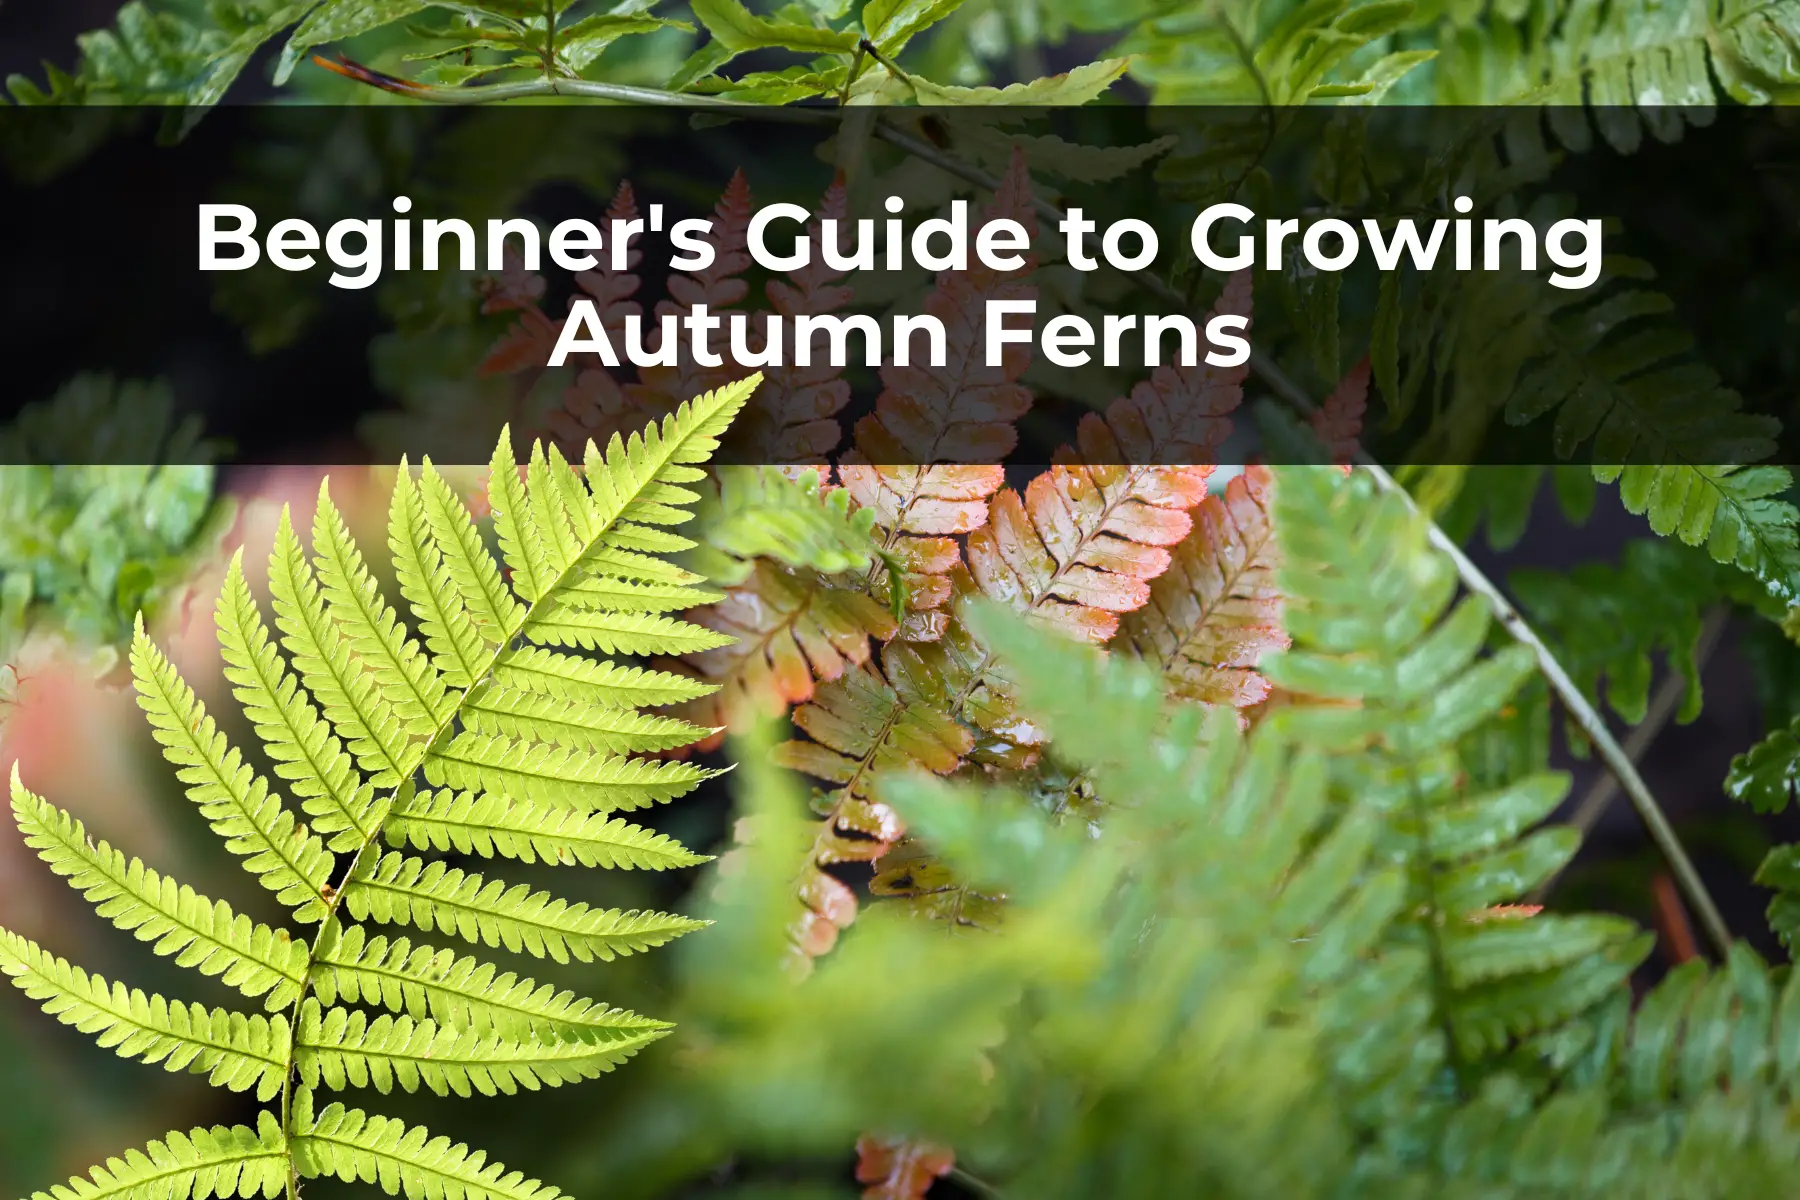 Beginner's Guide to Growing Autumn Ferns